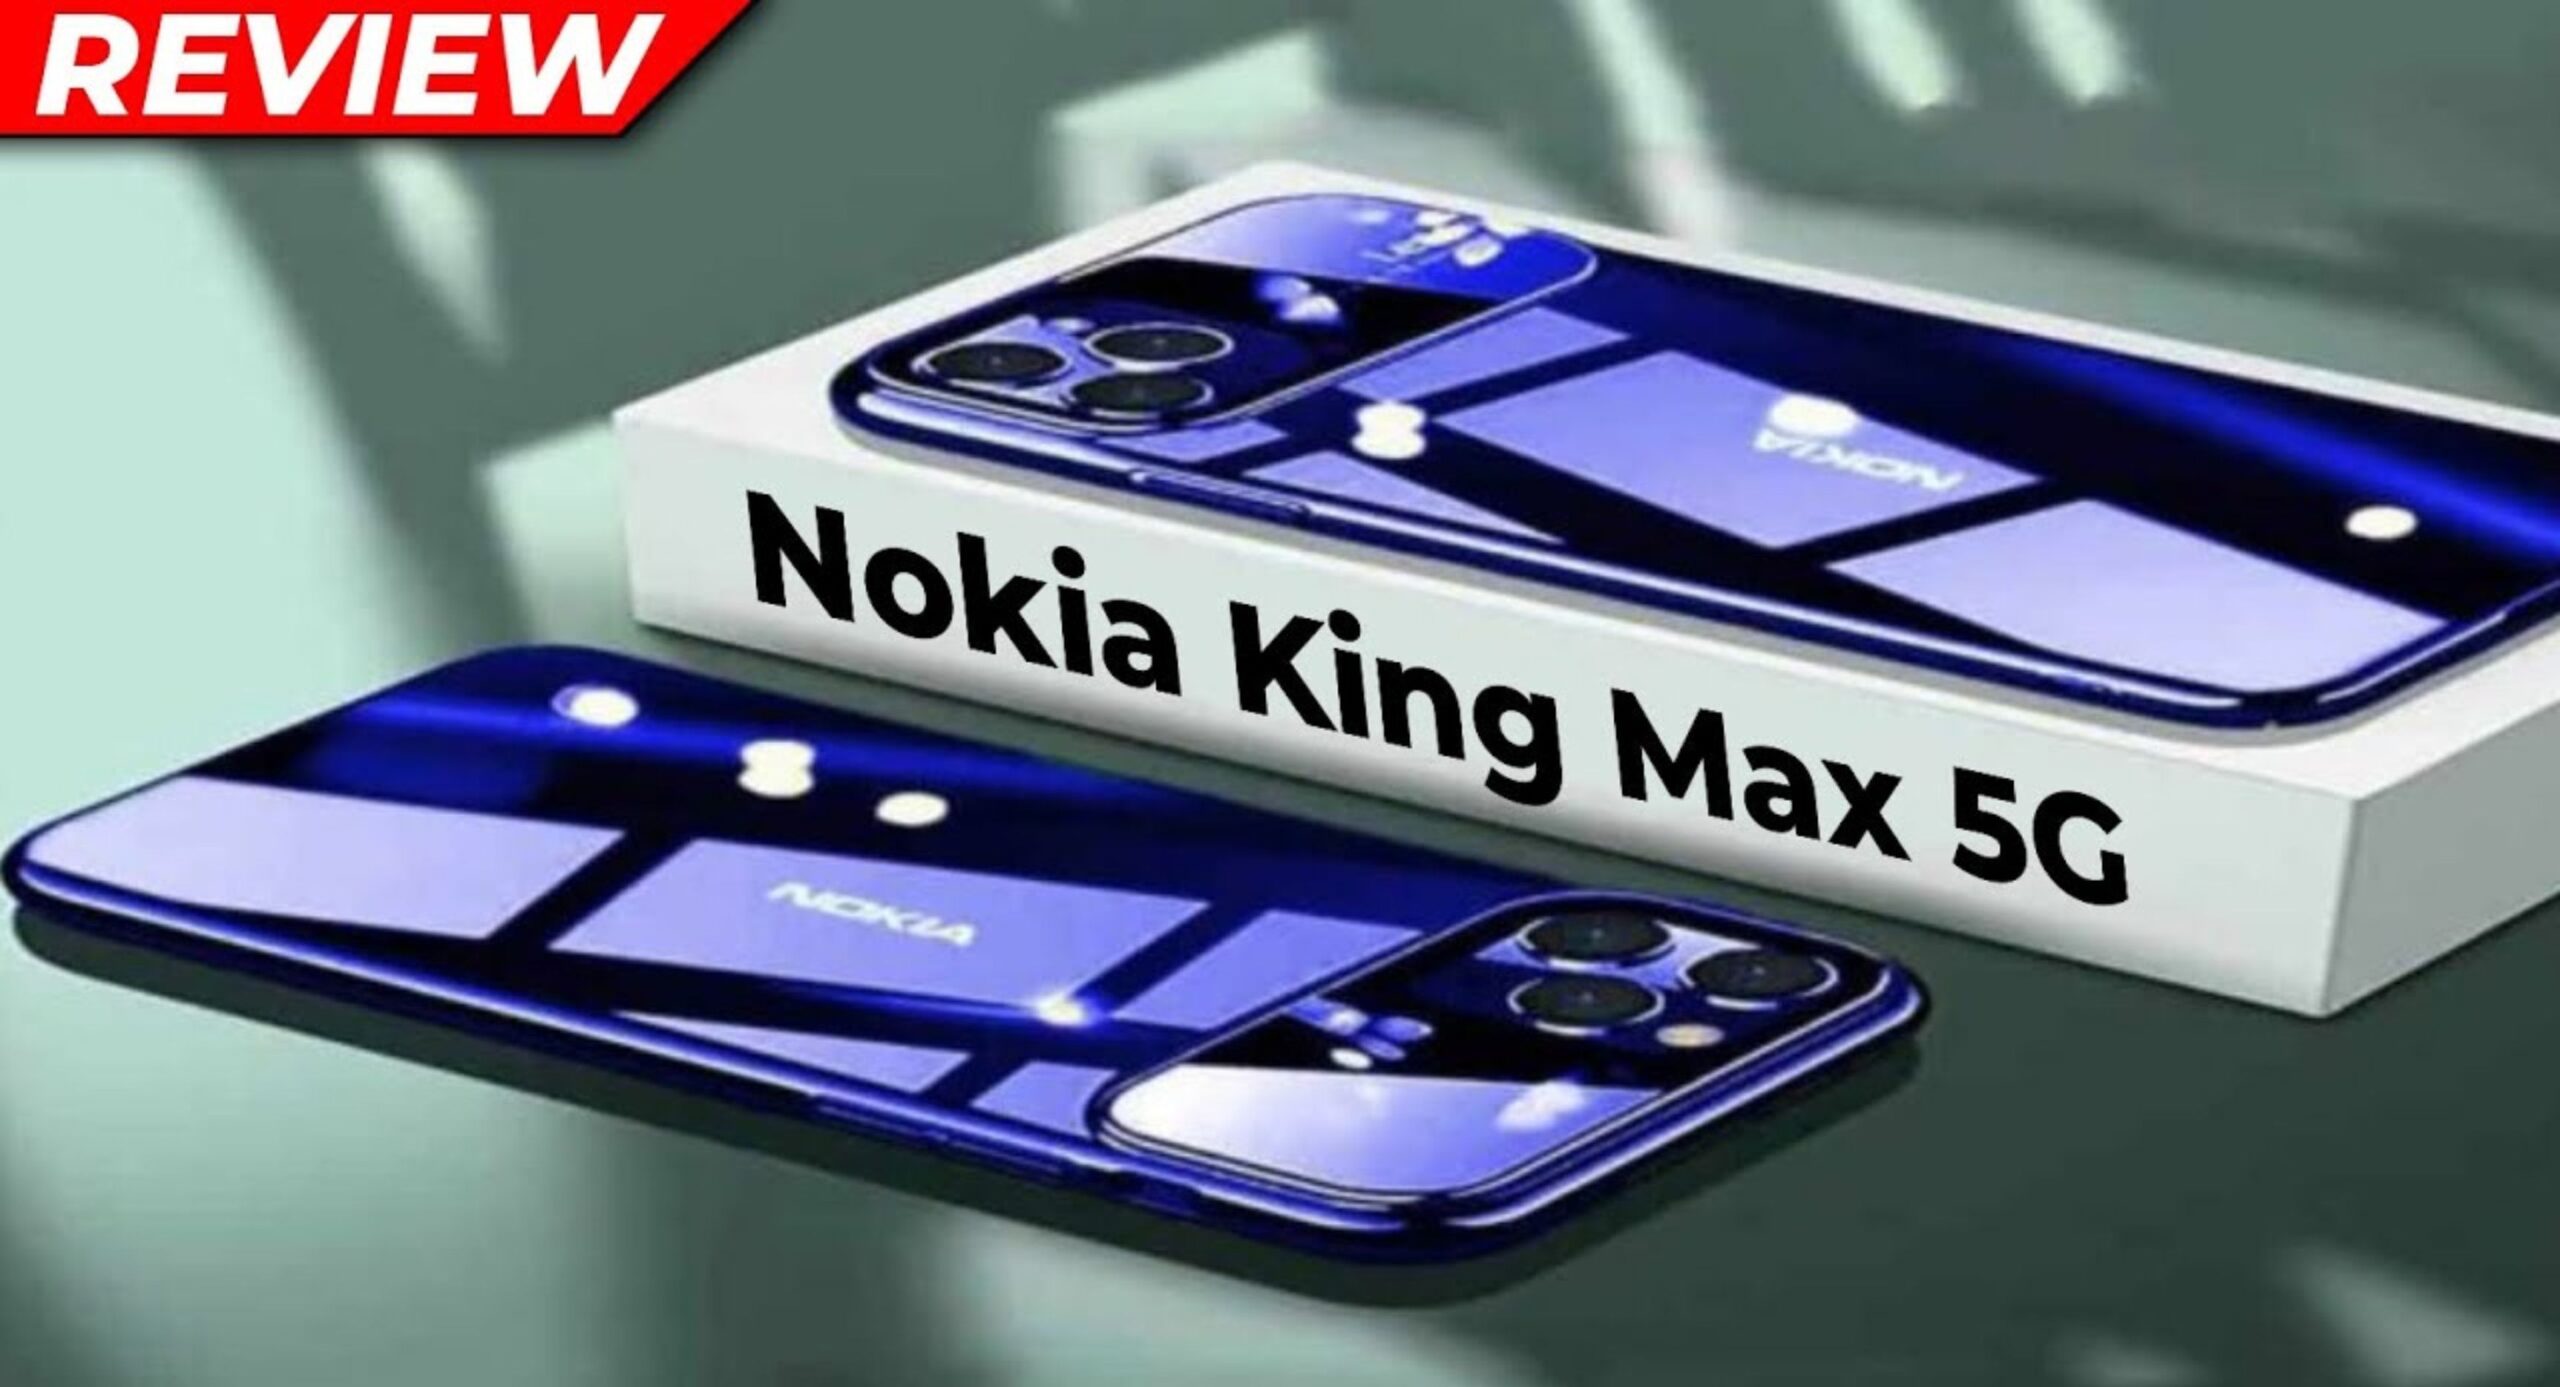 Nokia King Max 5G New Smartphone